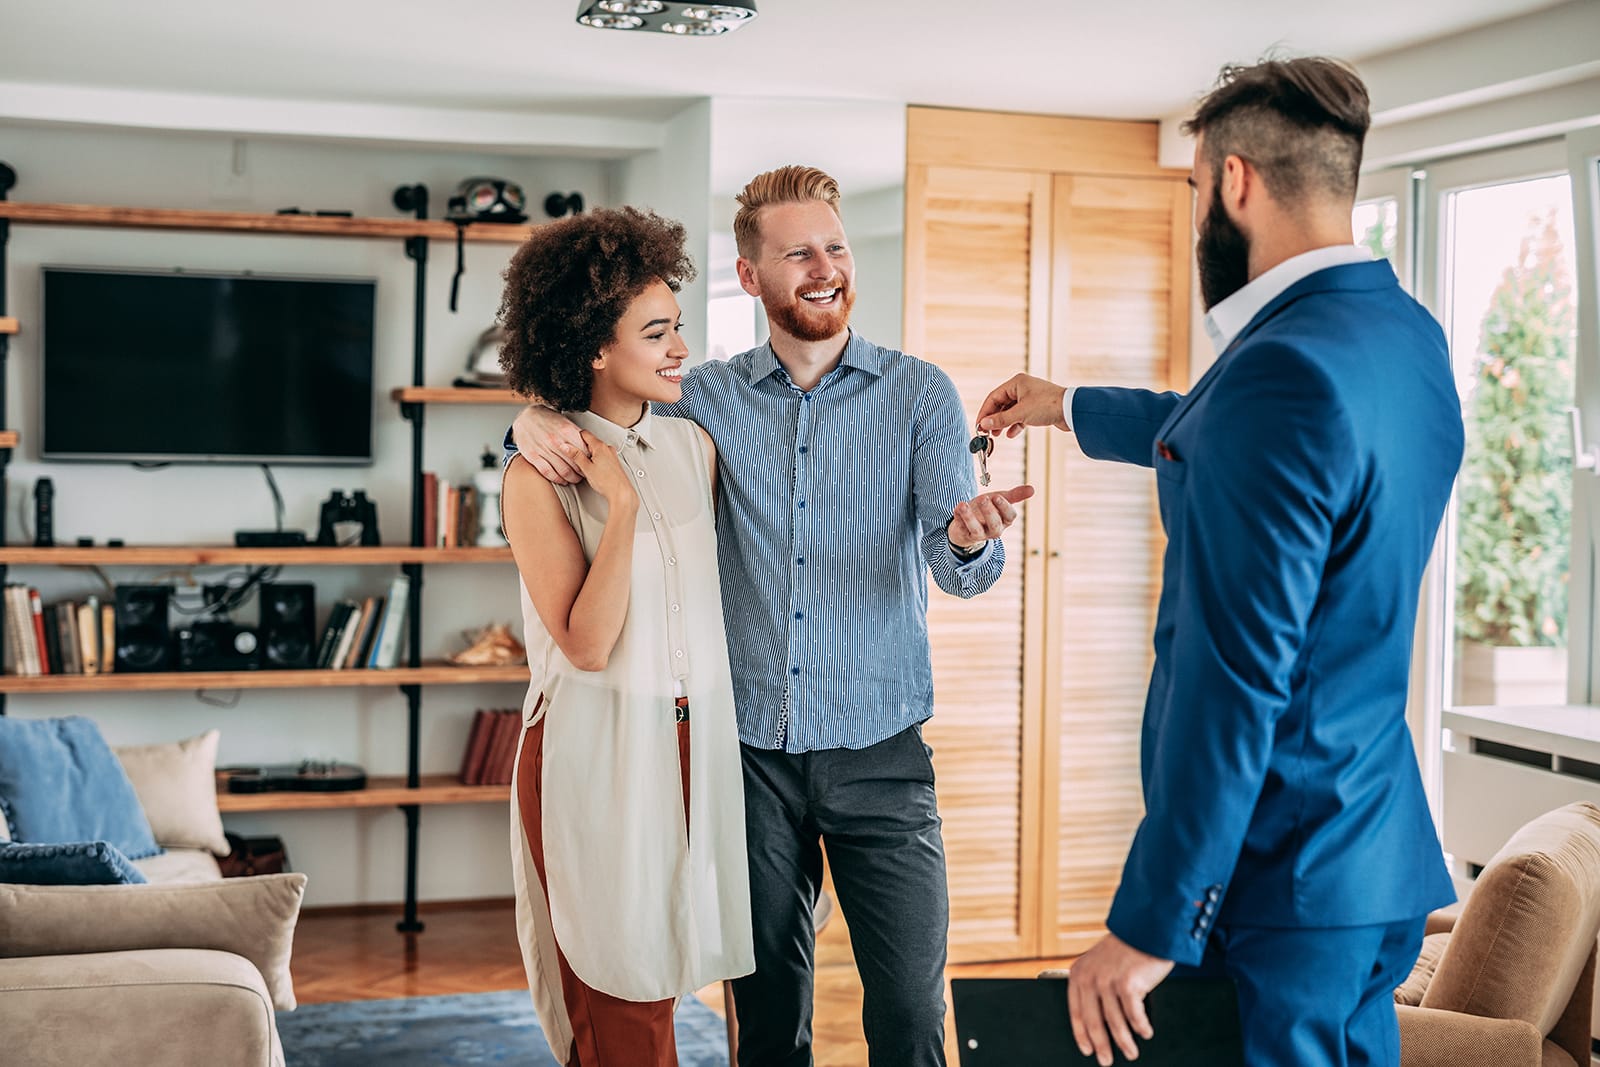 Millennial And GenZ Buyers  Drive 60% Of Home Purchases